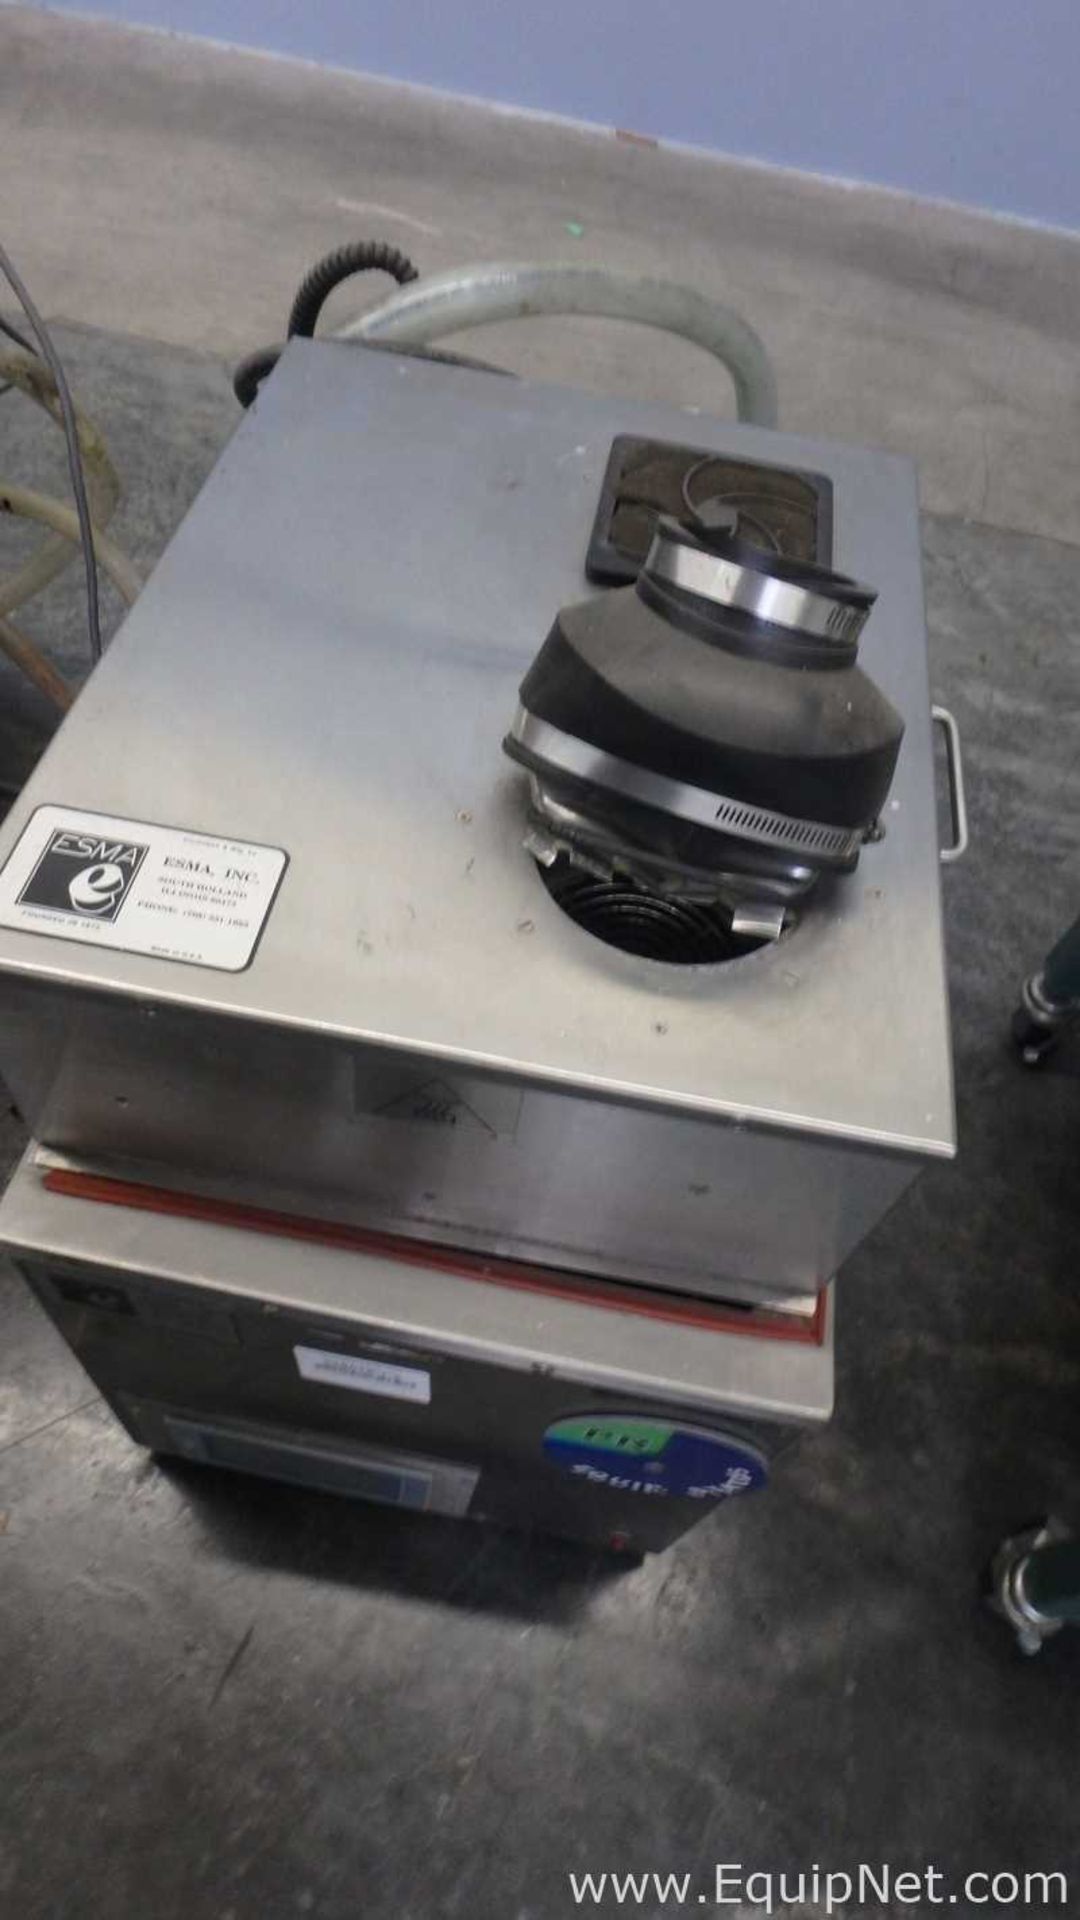 ESMA Inc. E700 Ultrasonic Cleaning System with E997 30Gal Heated Storage Tank - Image 19 of 38